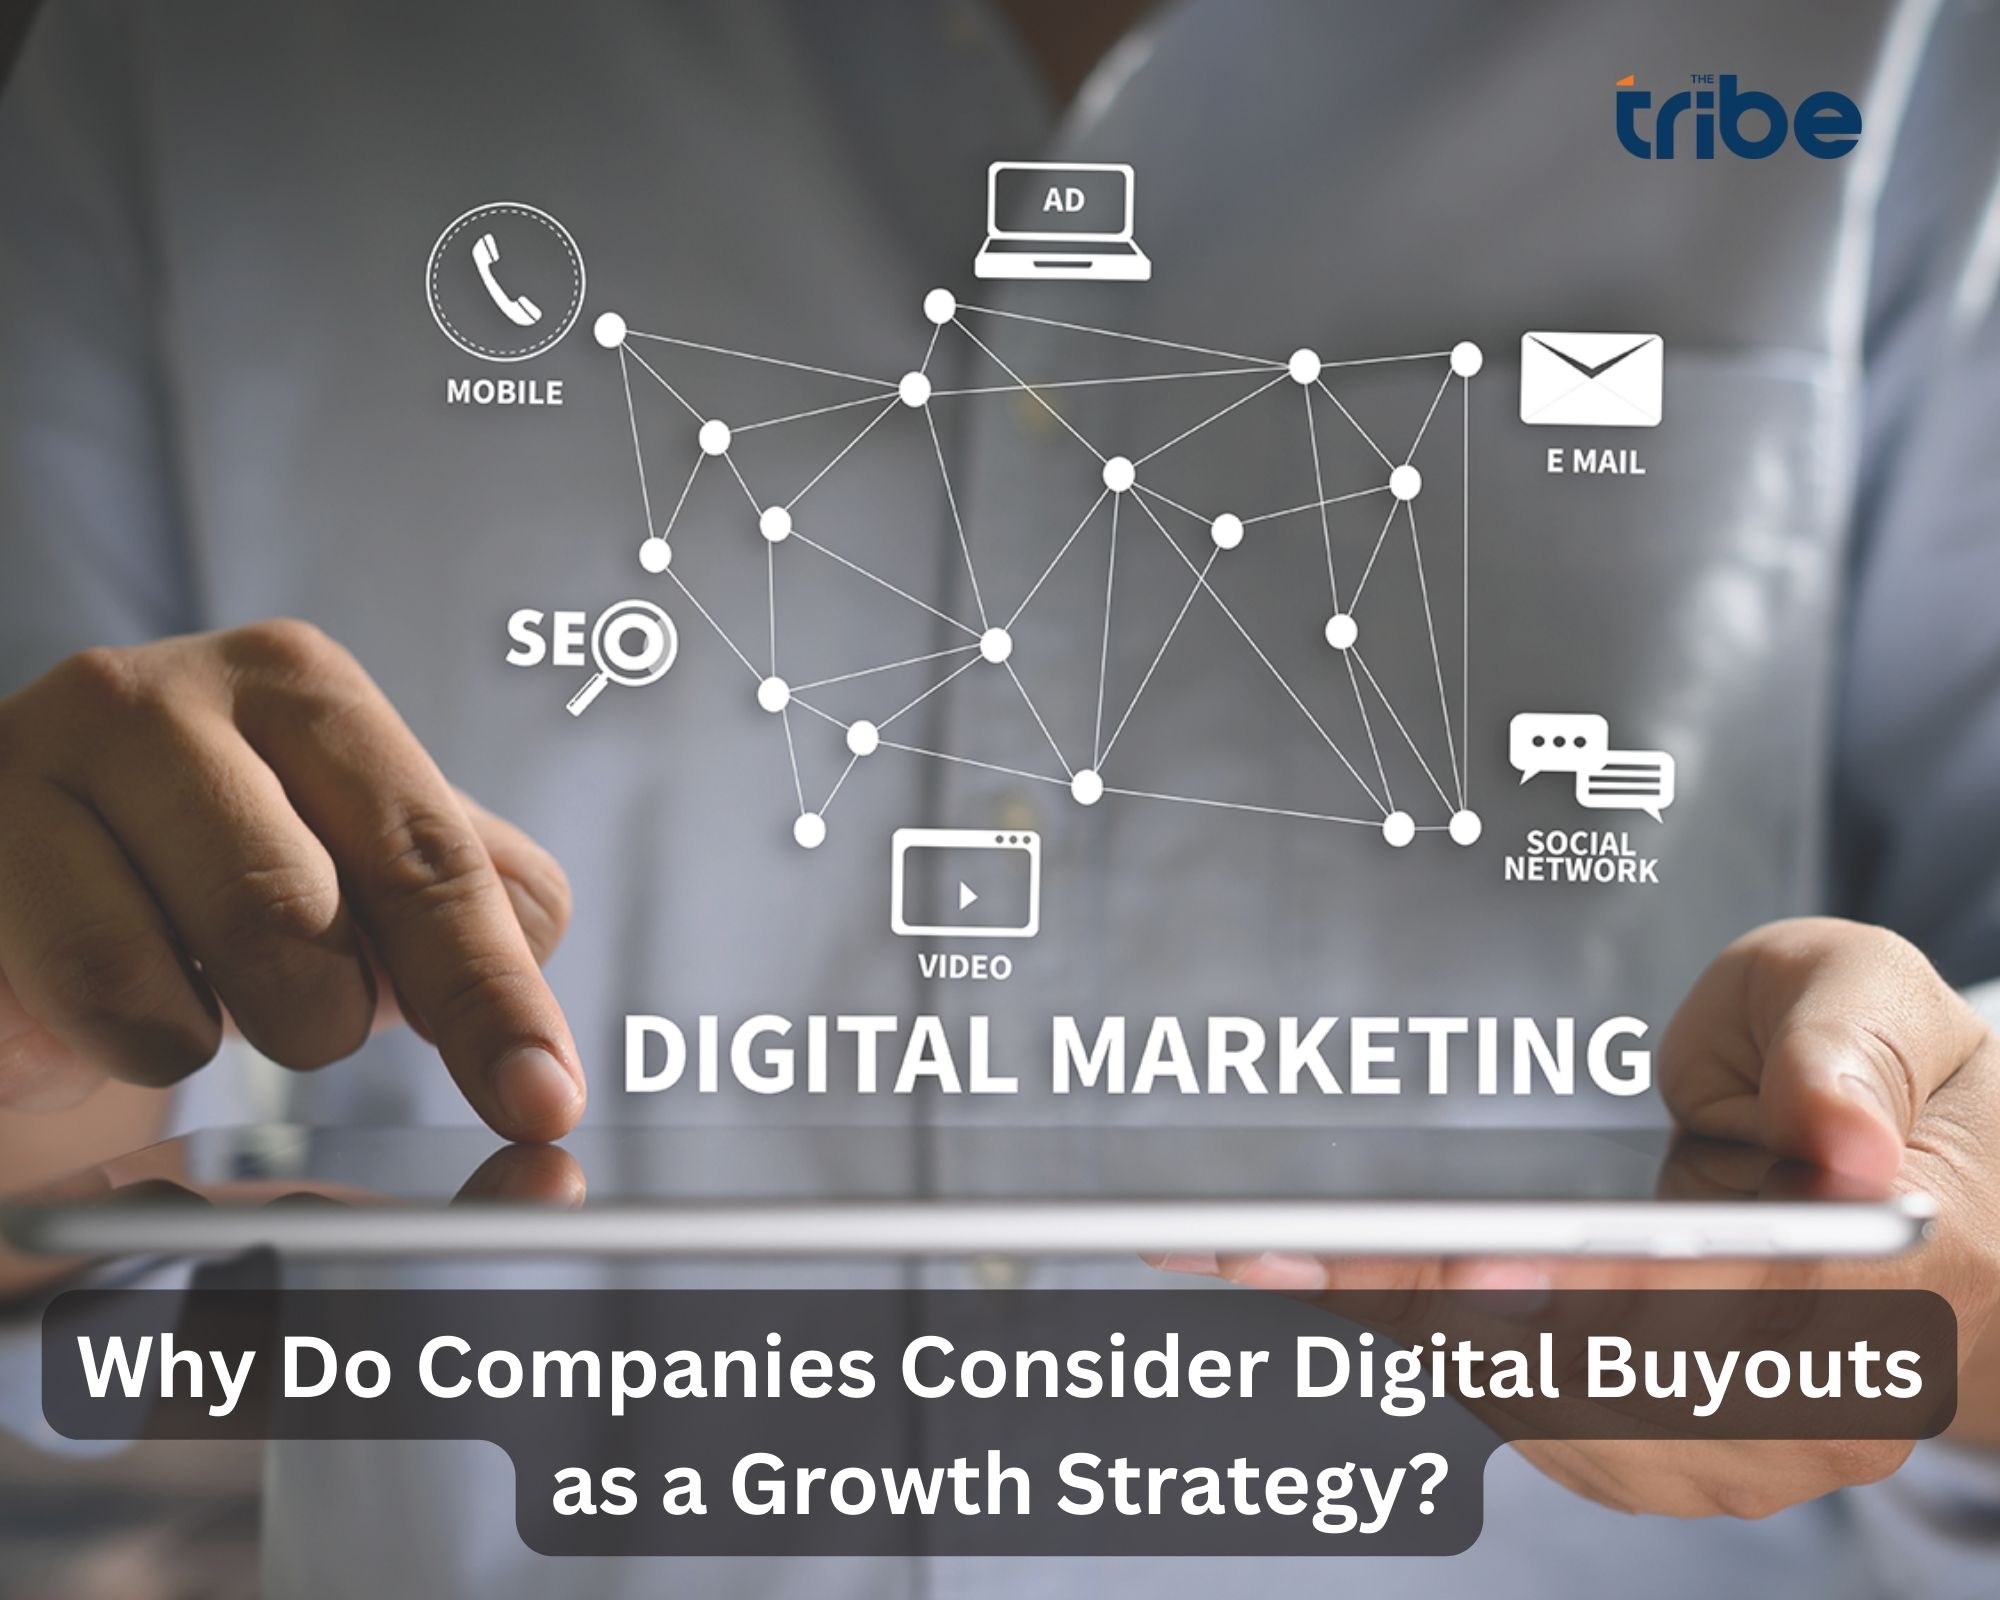 Digital Buyout: A Strategic Approach to Business Growth